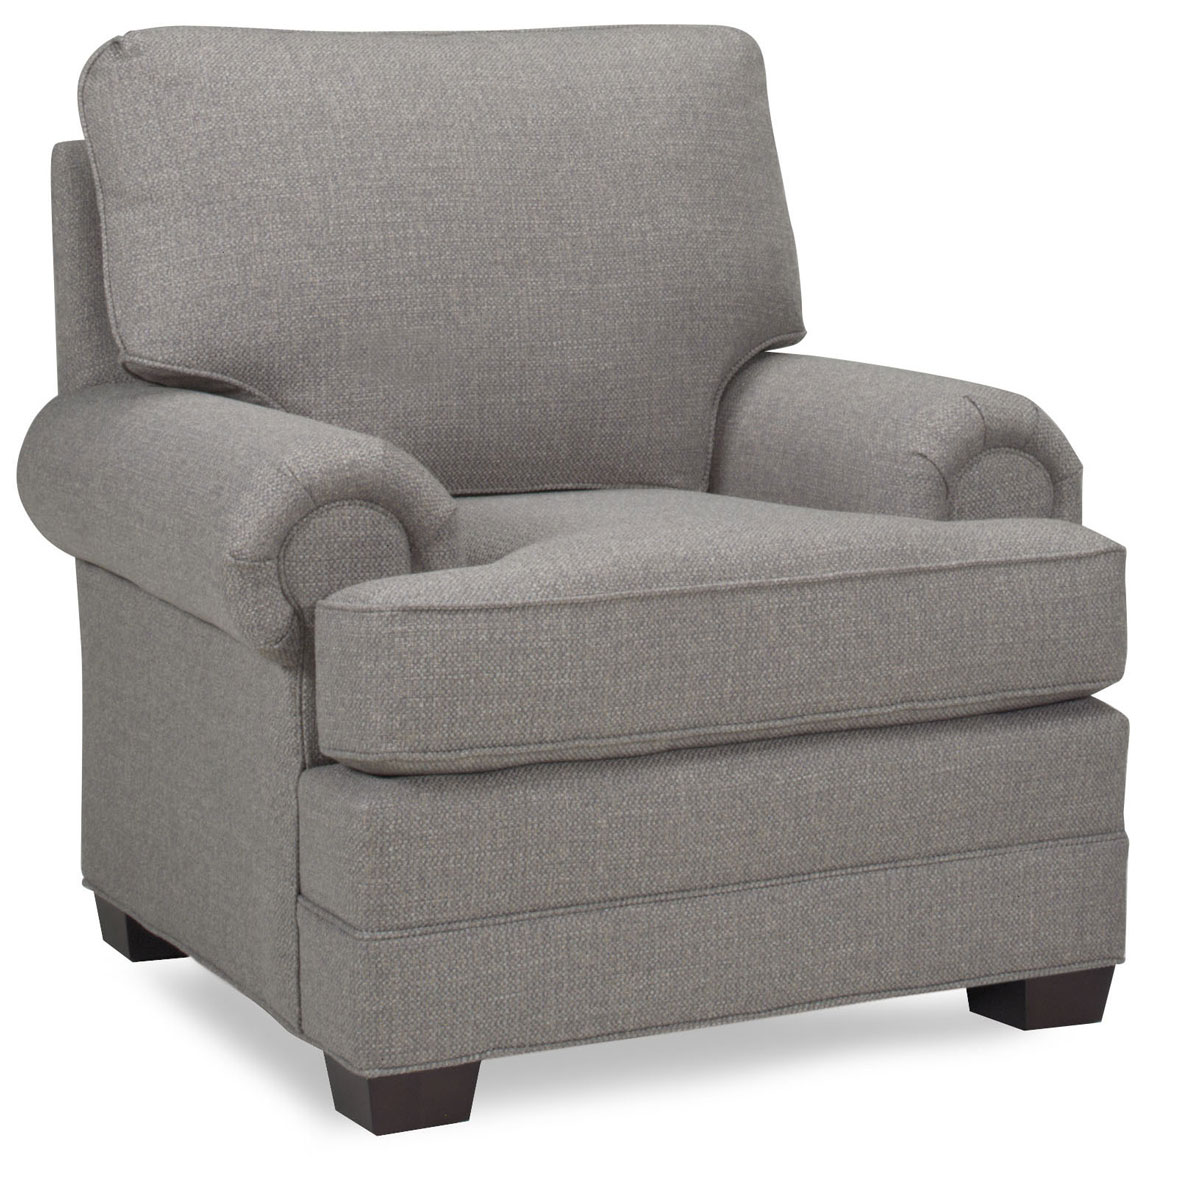 Temple Furniture 9515 Winston Chair